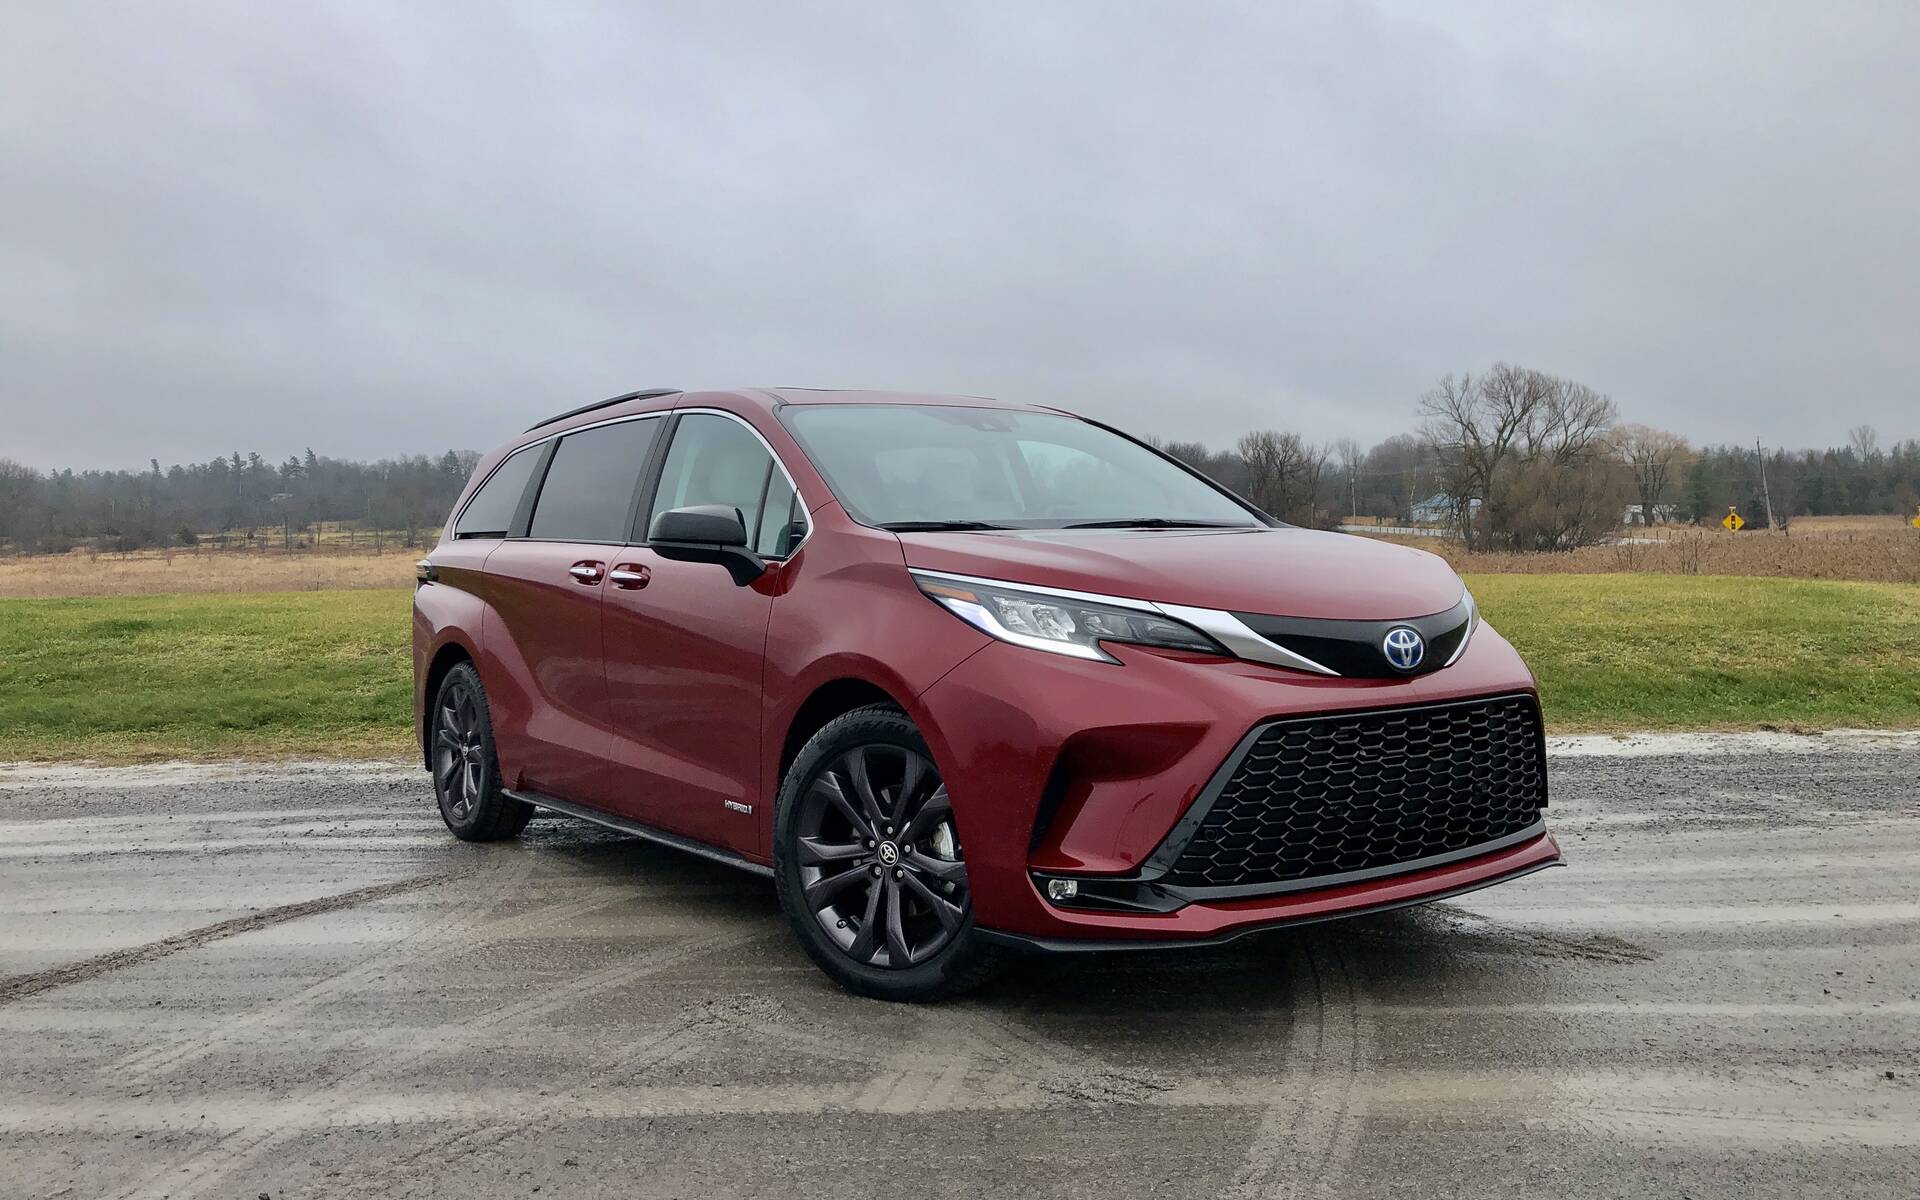 2021 Toyota Sienna: What's It Like to Live With?